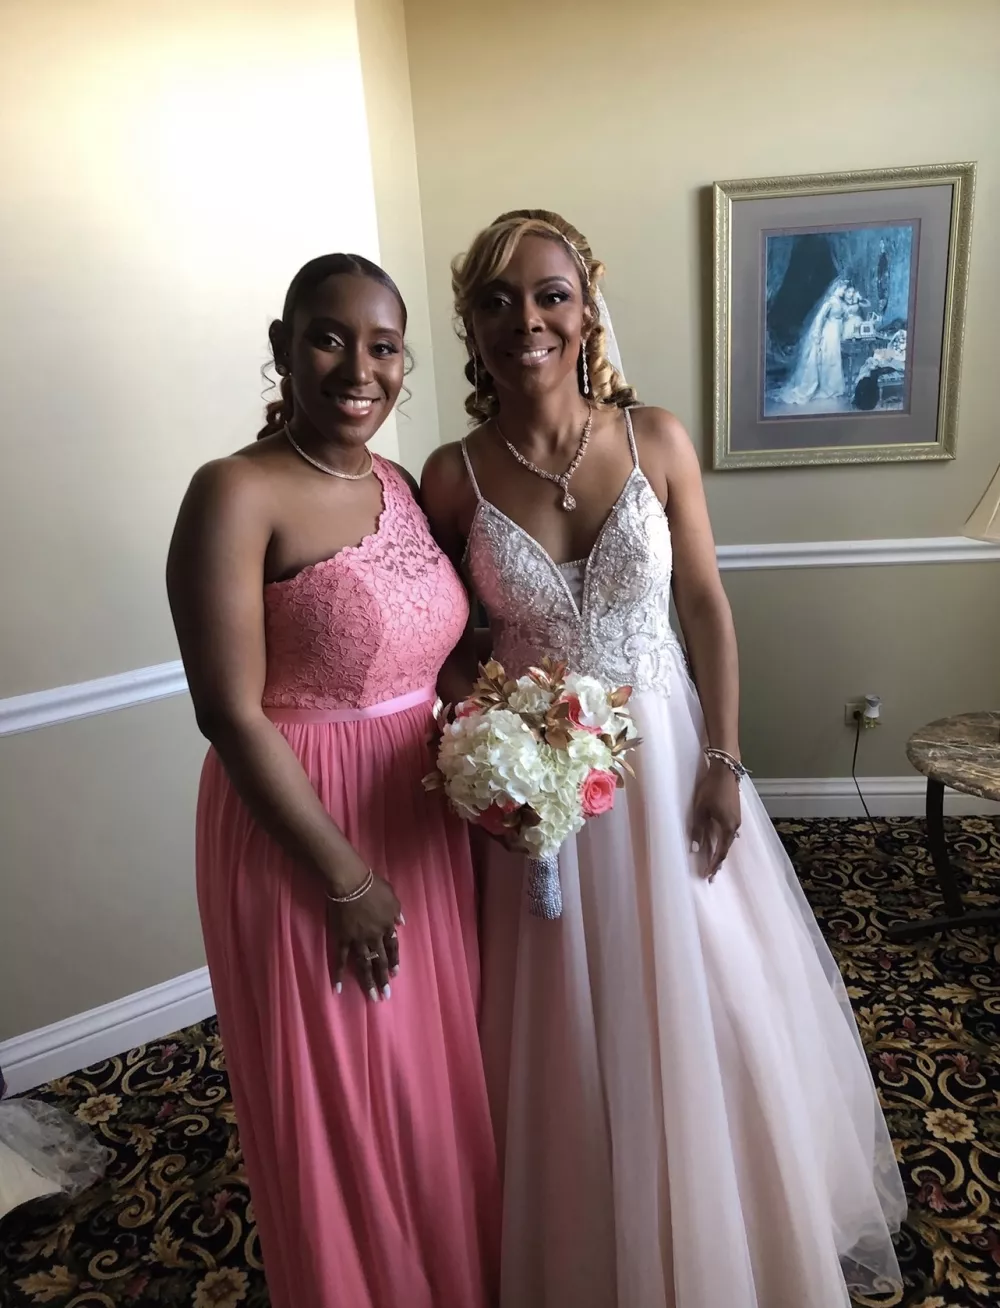 Ashely and Dominique in wedding attire